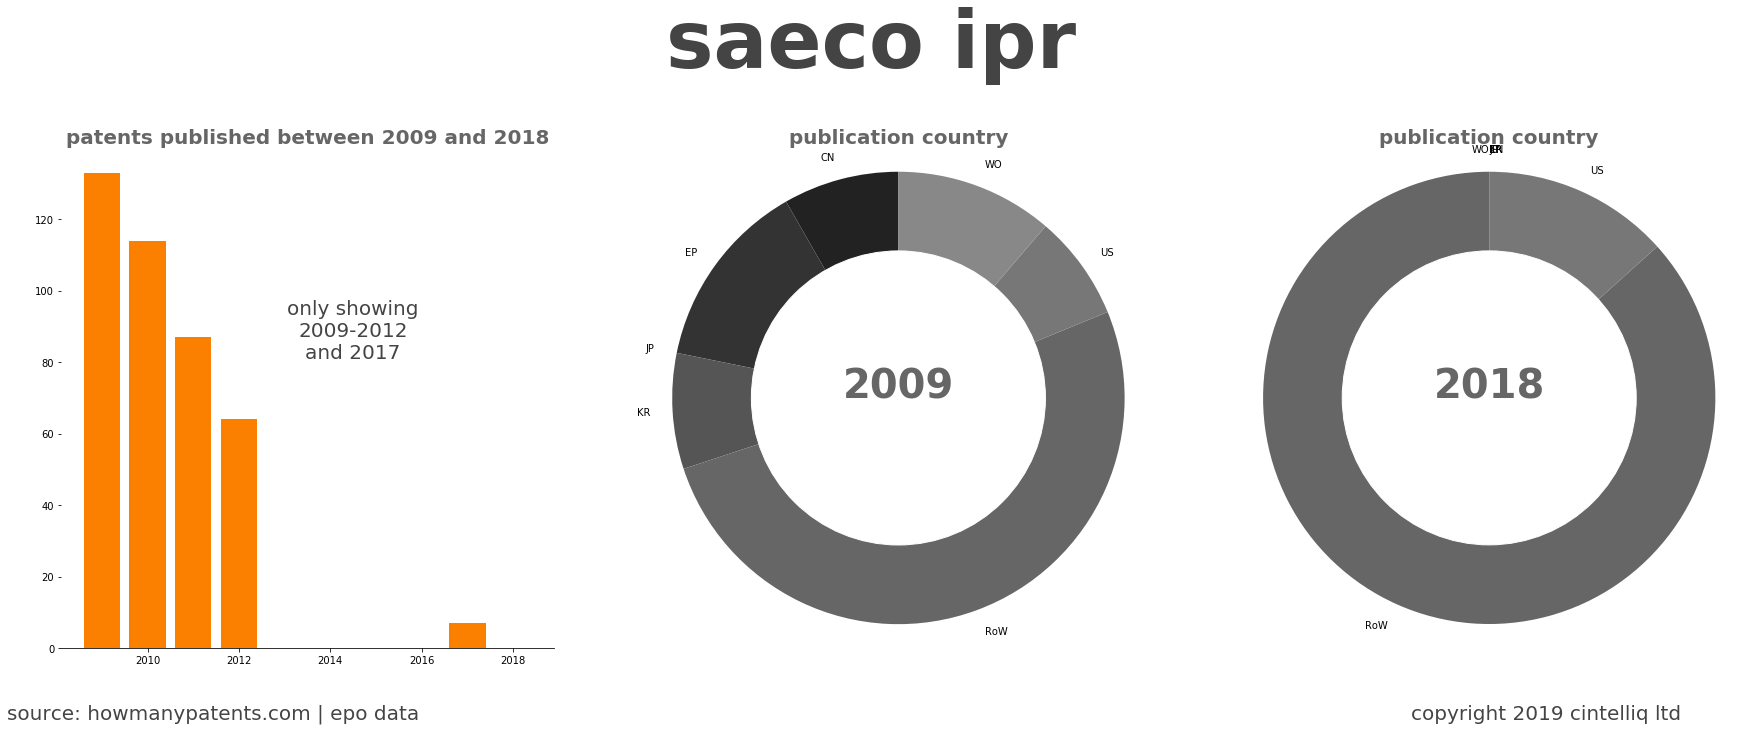 summary of patents for Saeco Ipr